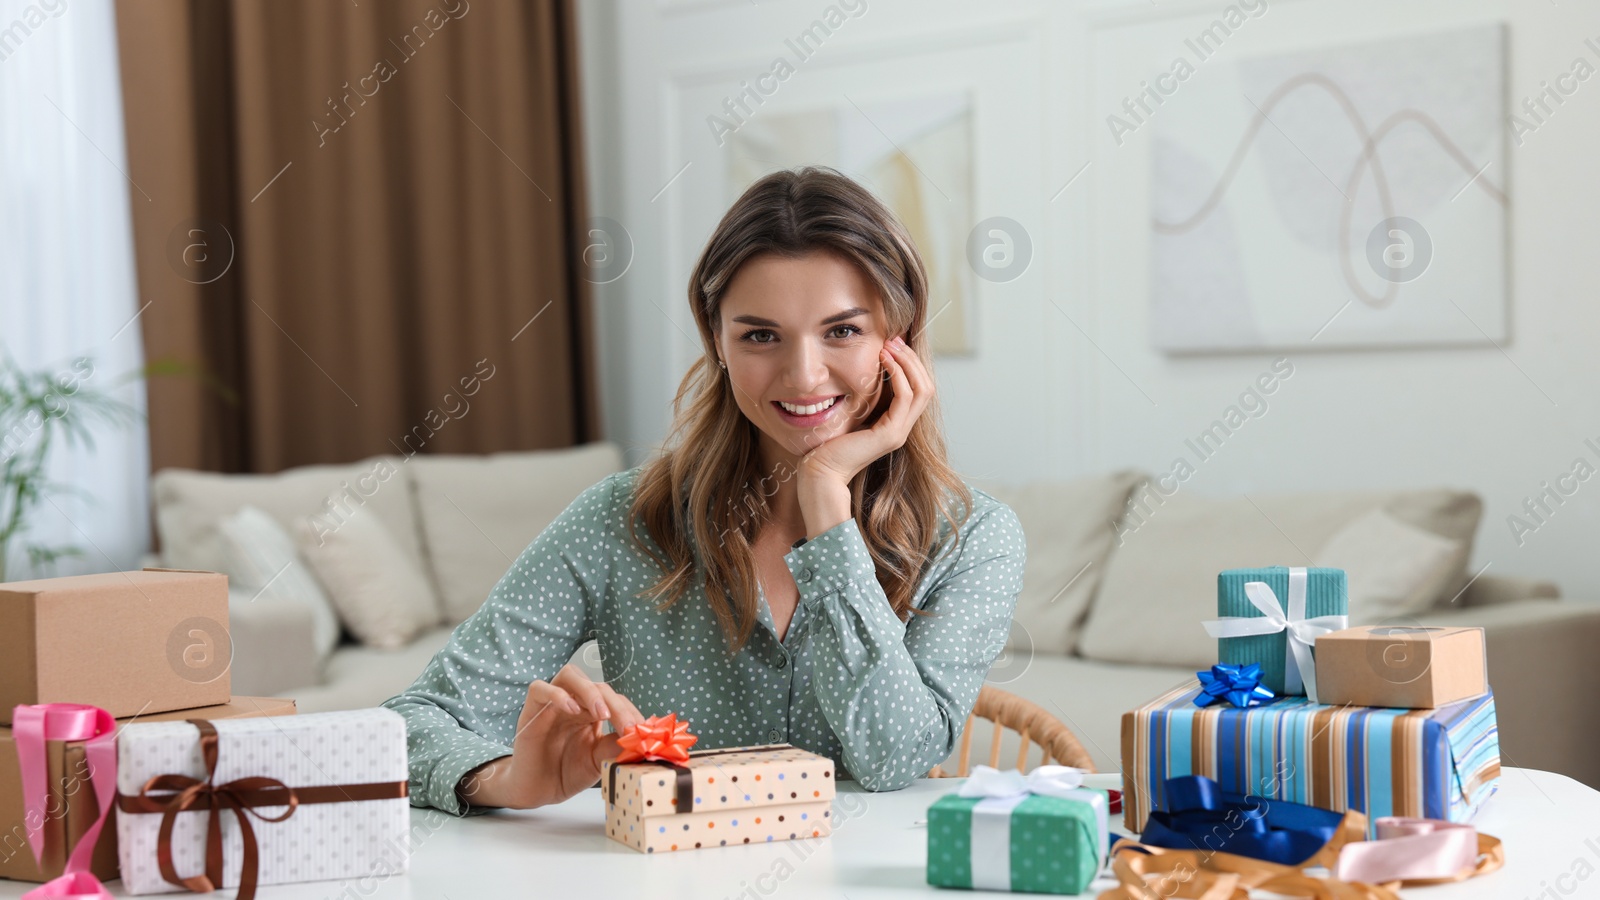 Photo of Beautiful young woman decorating gift box with bow at table in living room